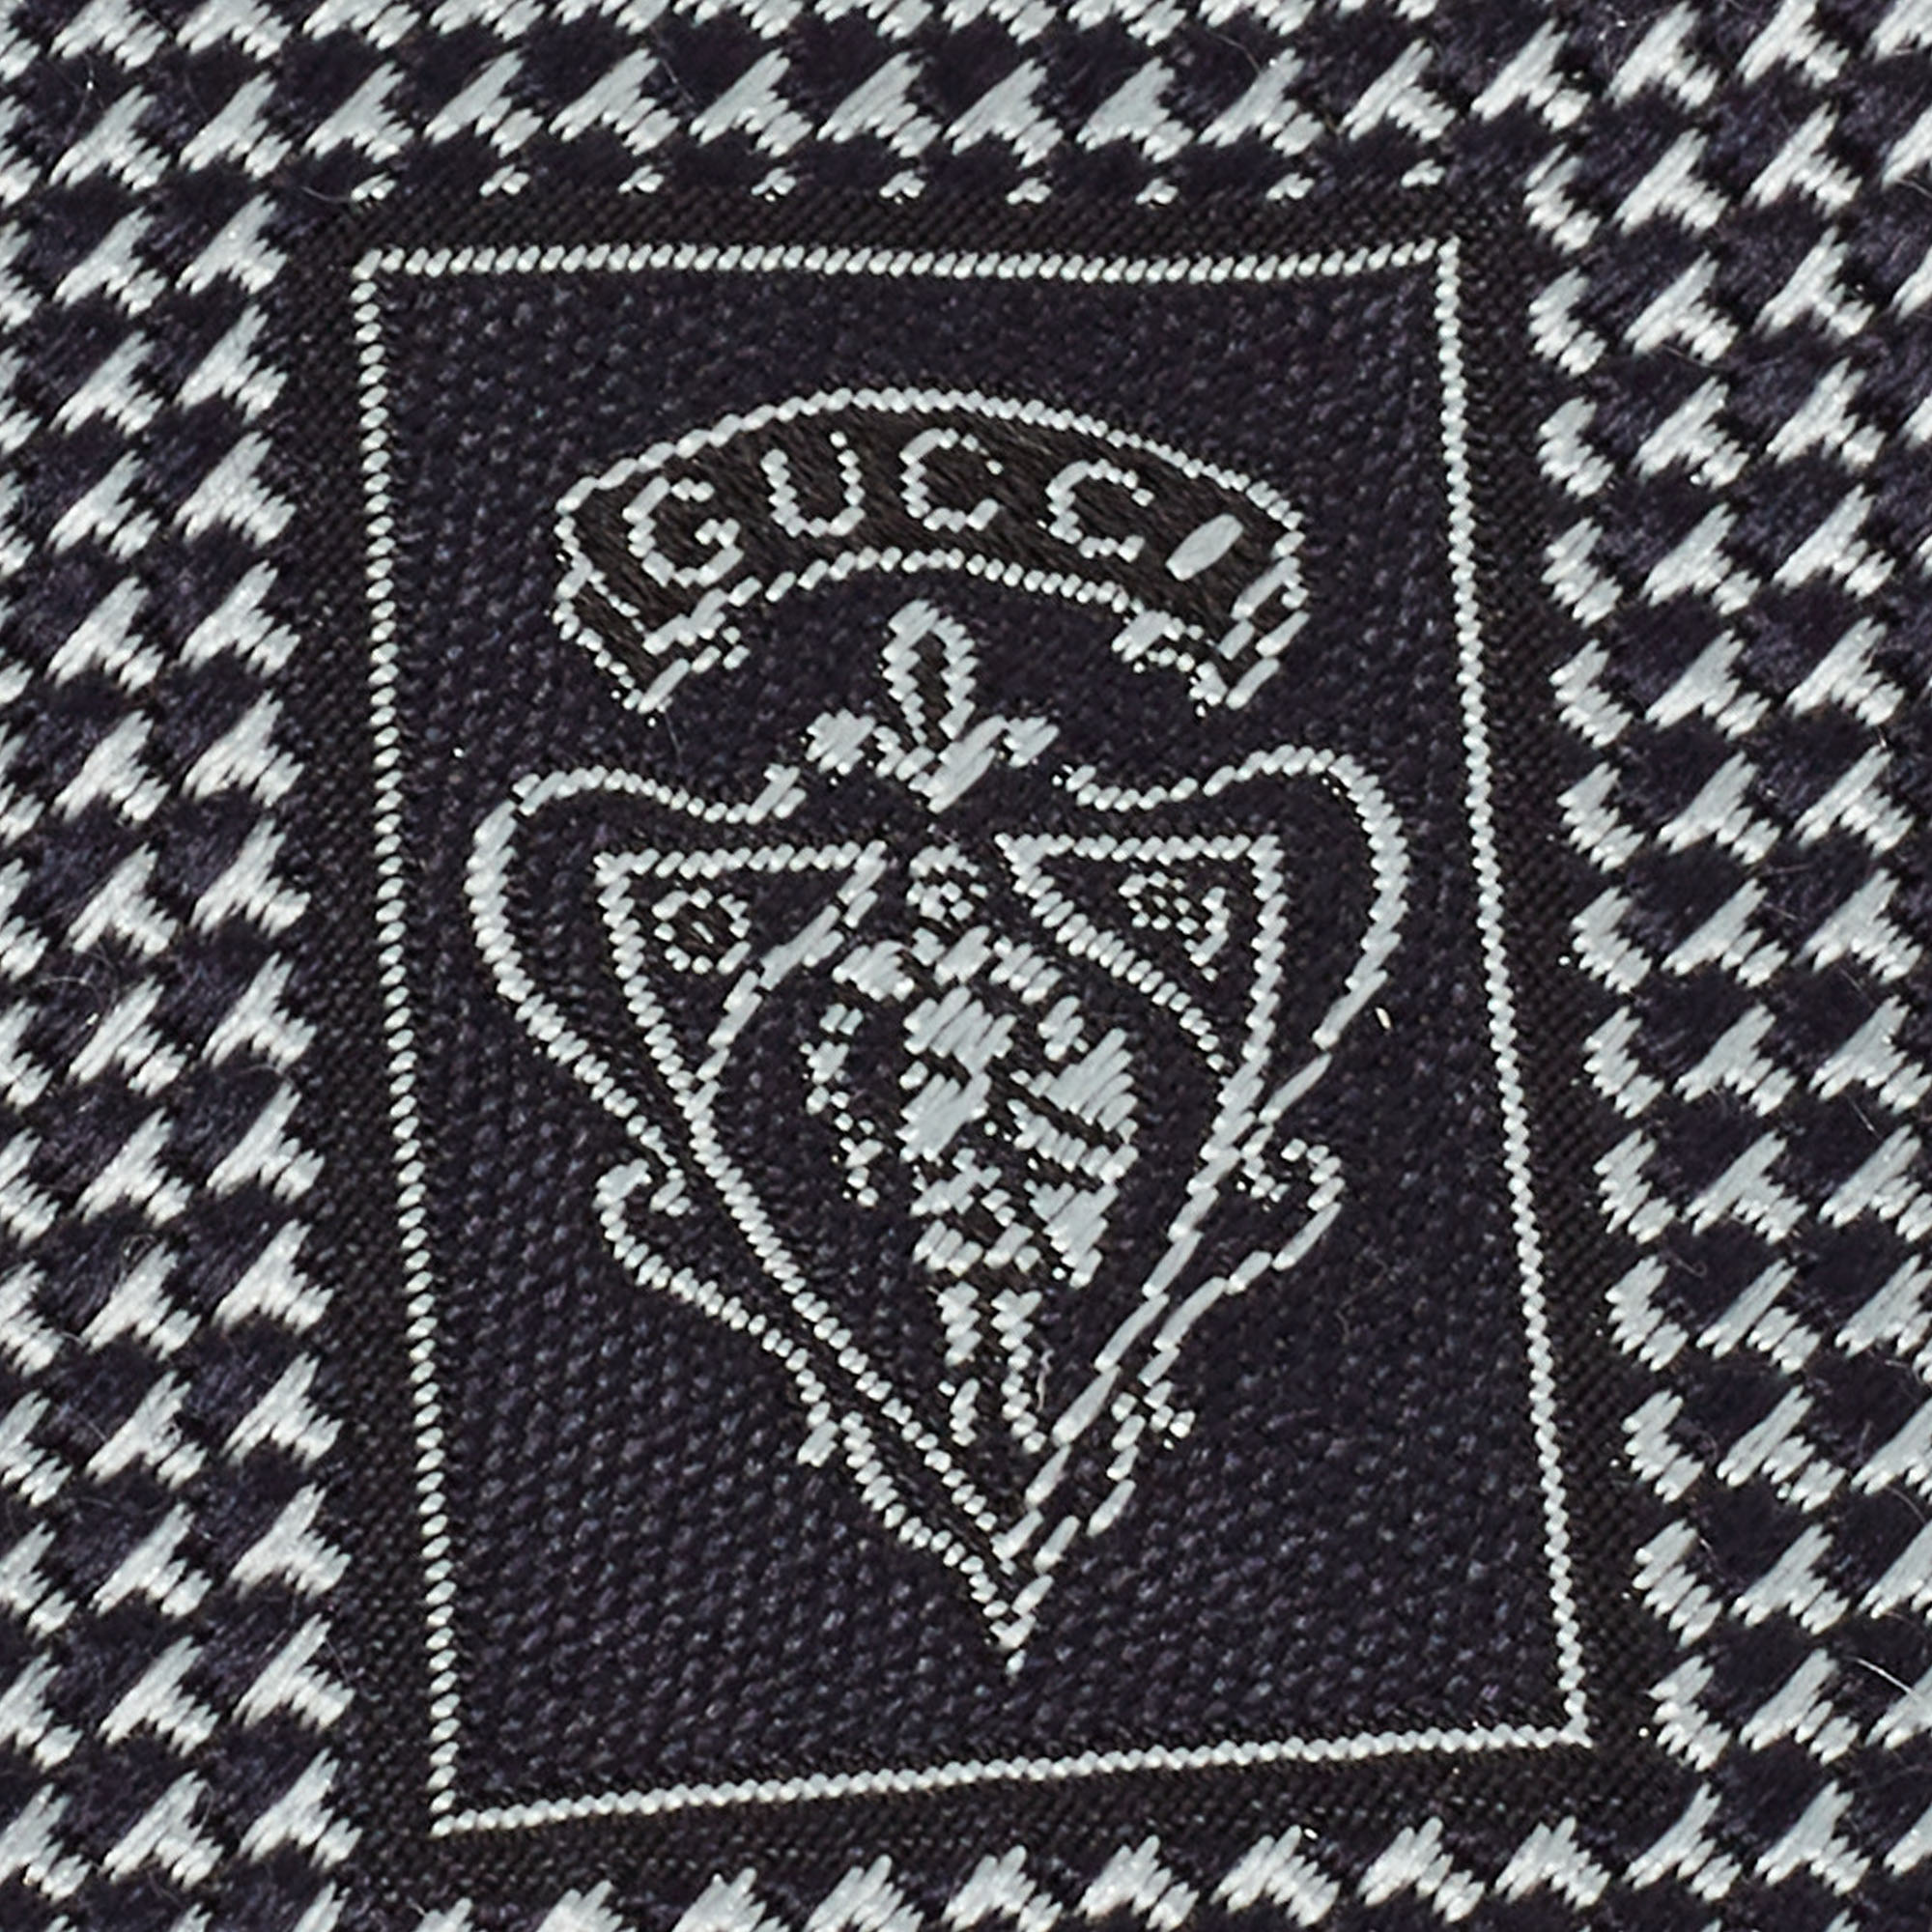 Gucci Navy Blue Patterned Silk Tie